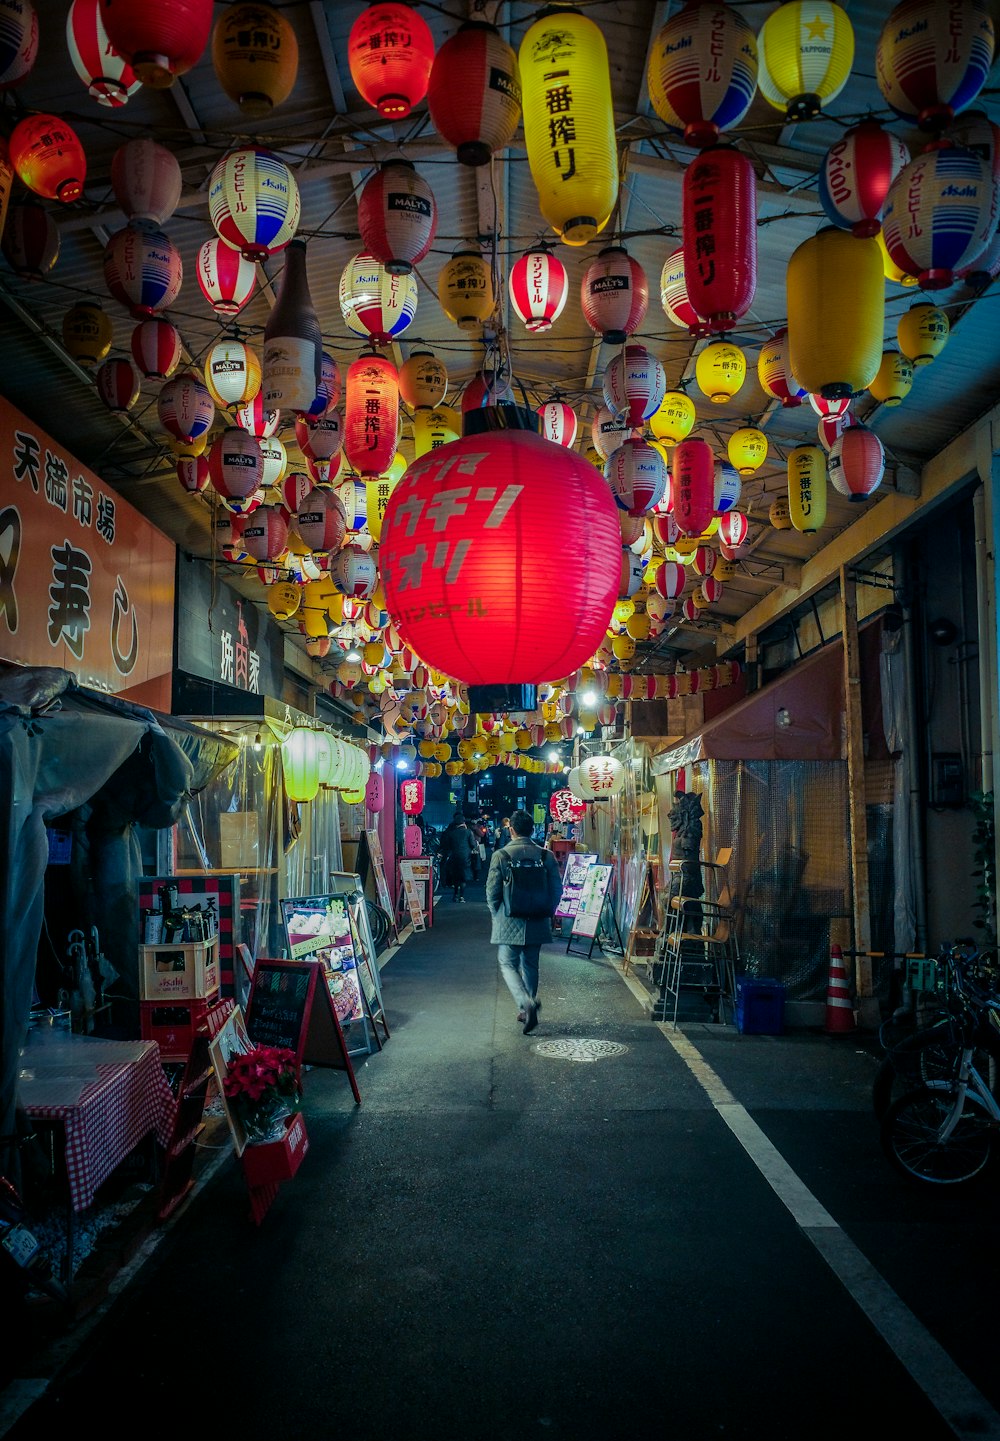 a person walking down a street with lots of lanterns hanging from the ceiling